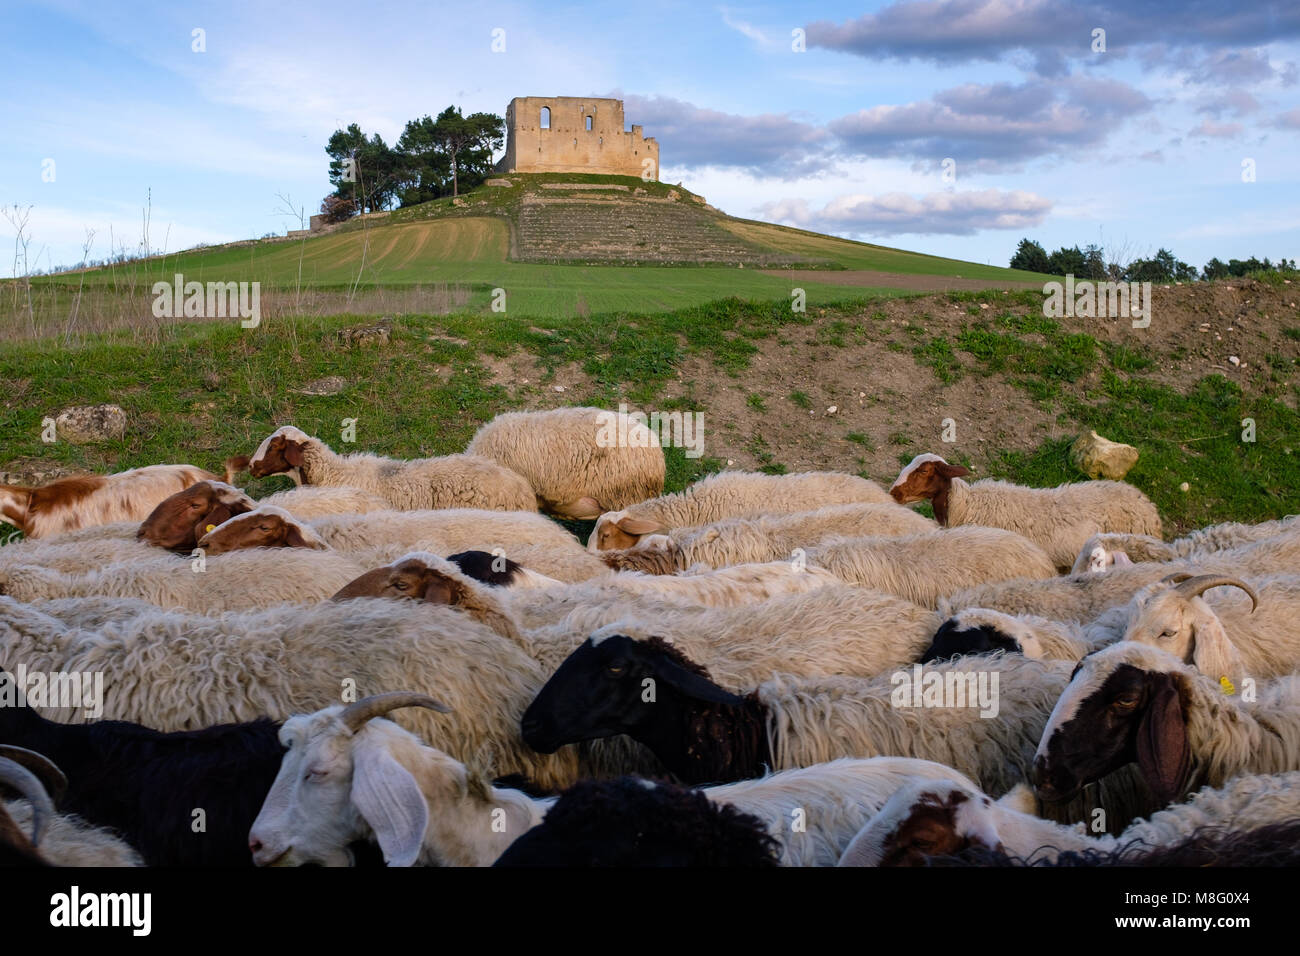 Ruins of Frederick II's castle in Gravina in Puglia with sheep in the foreground. Apulia region, Italy Stock Photo